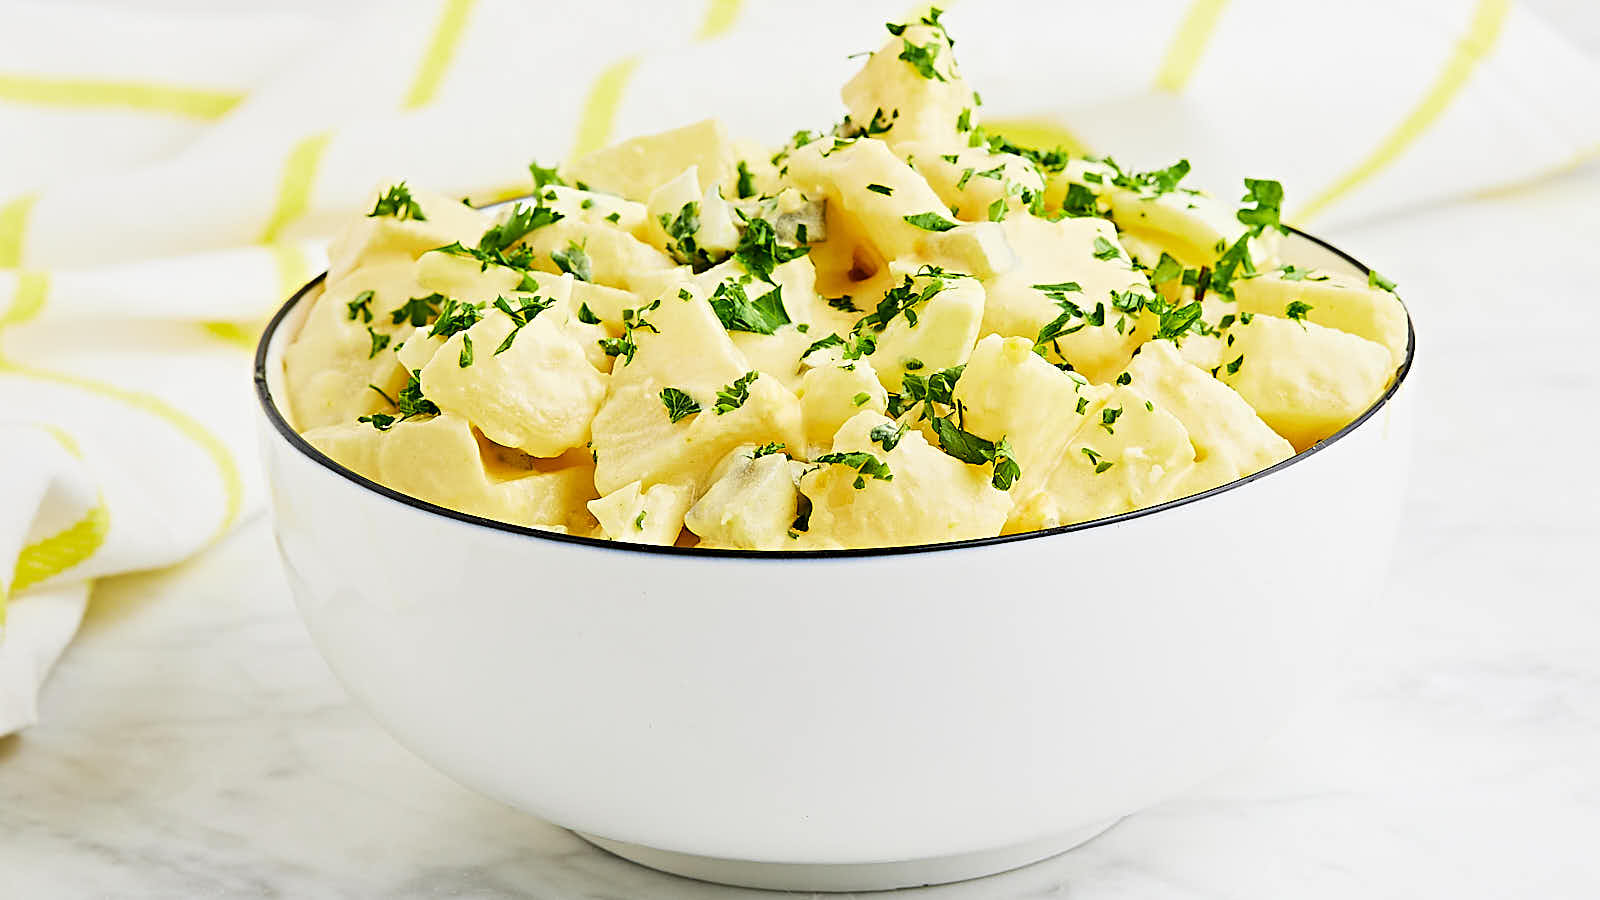 Classic Cold German Potato Salad recipe by Cheerful Cook.